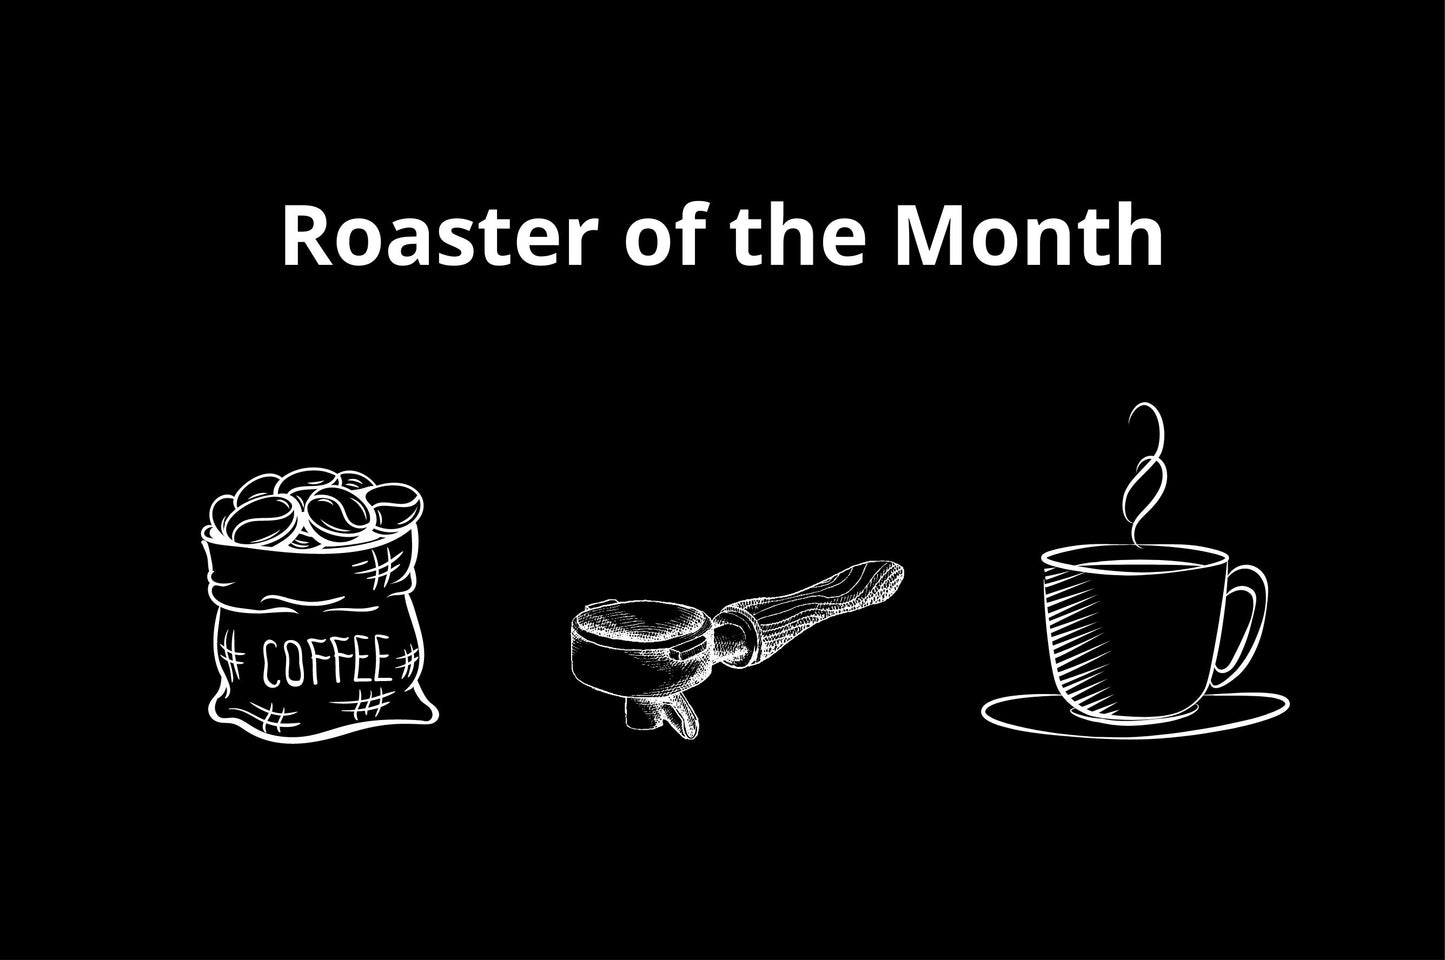 Roaster of the Month